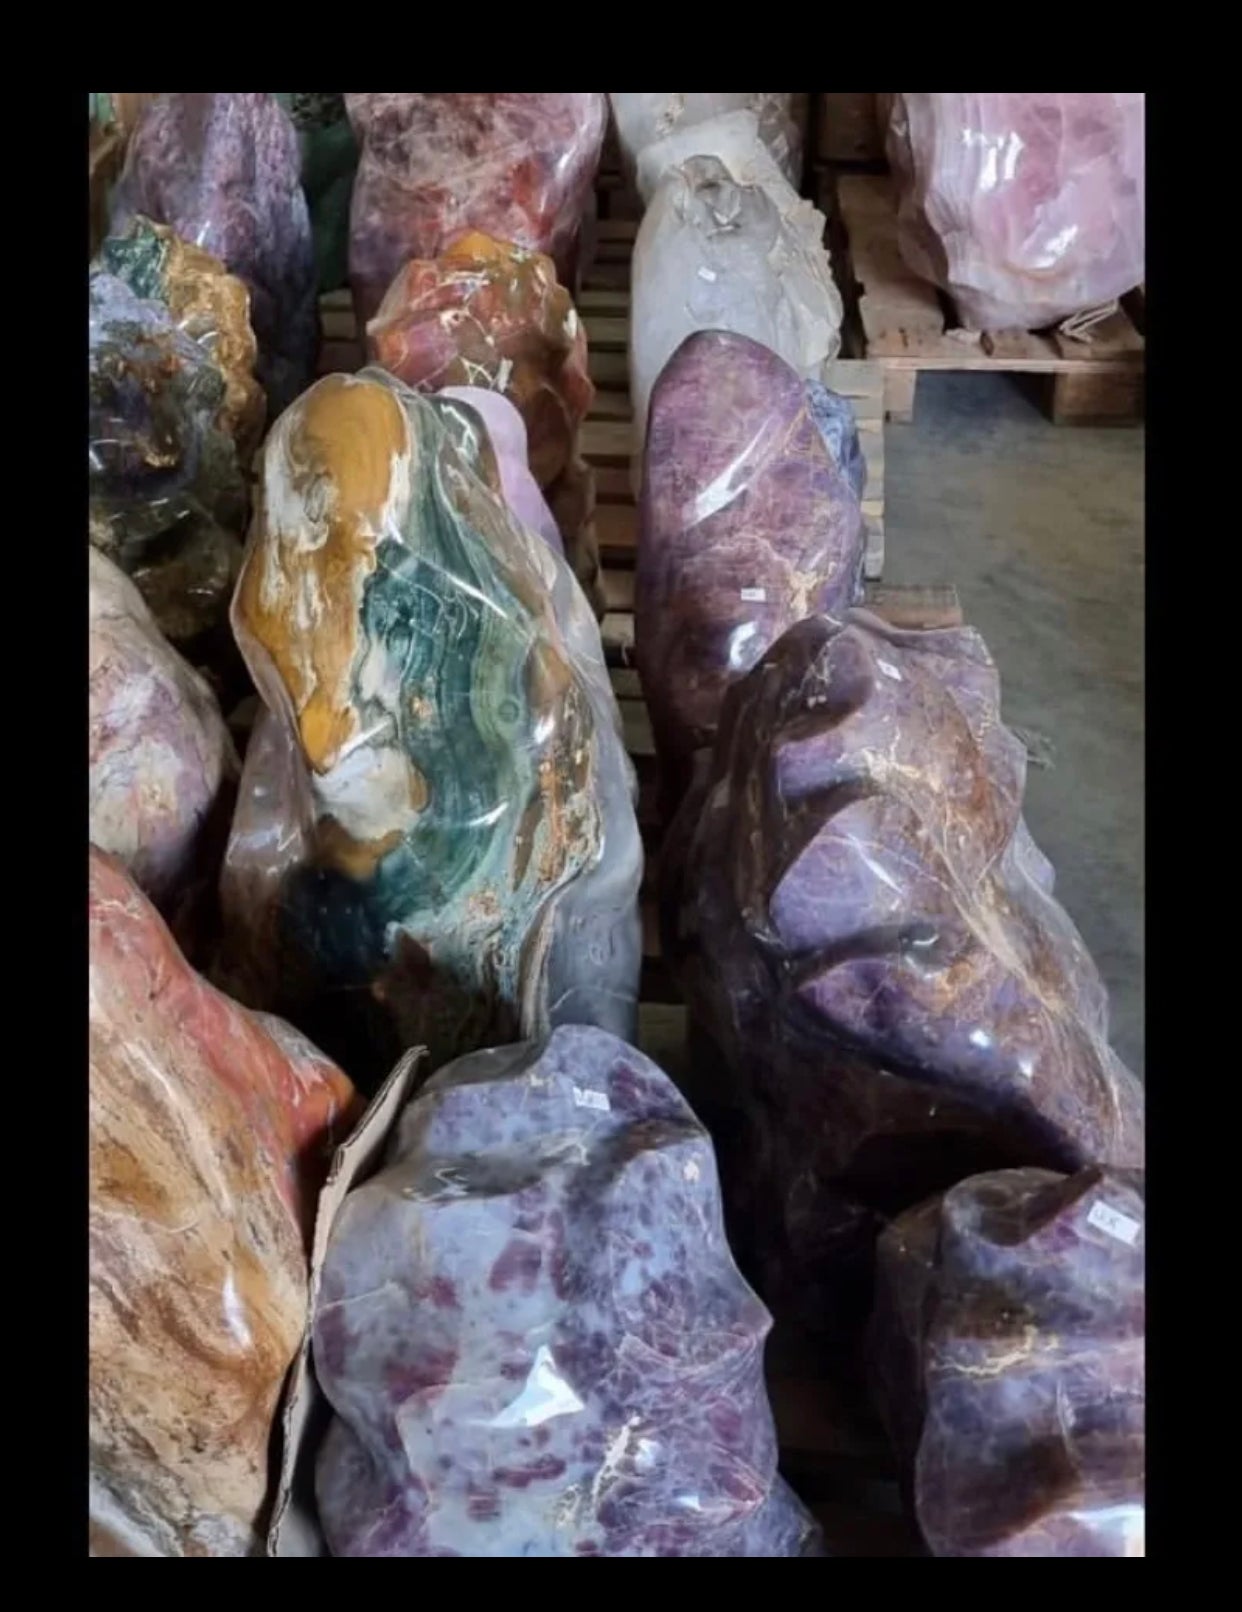 Quality crystals, madagascan crystals, large ocean jasper, responsibly sourced crystals uk